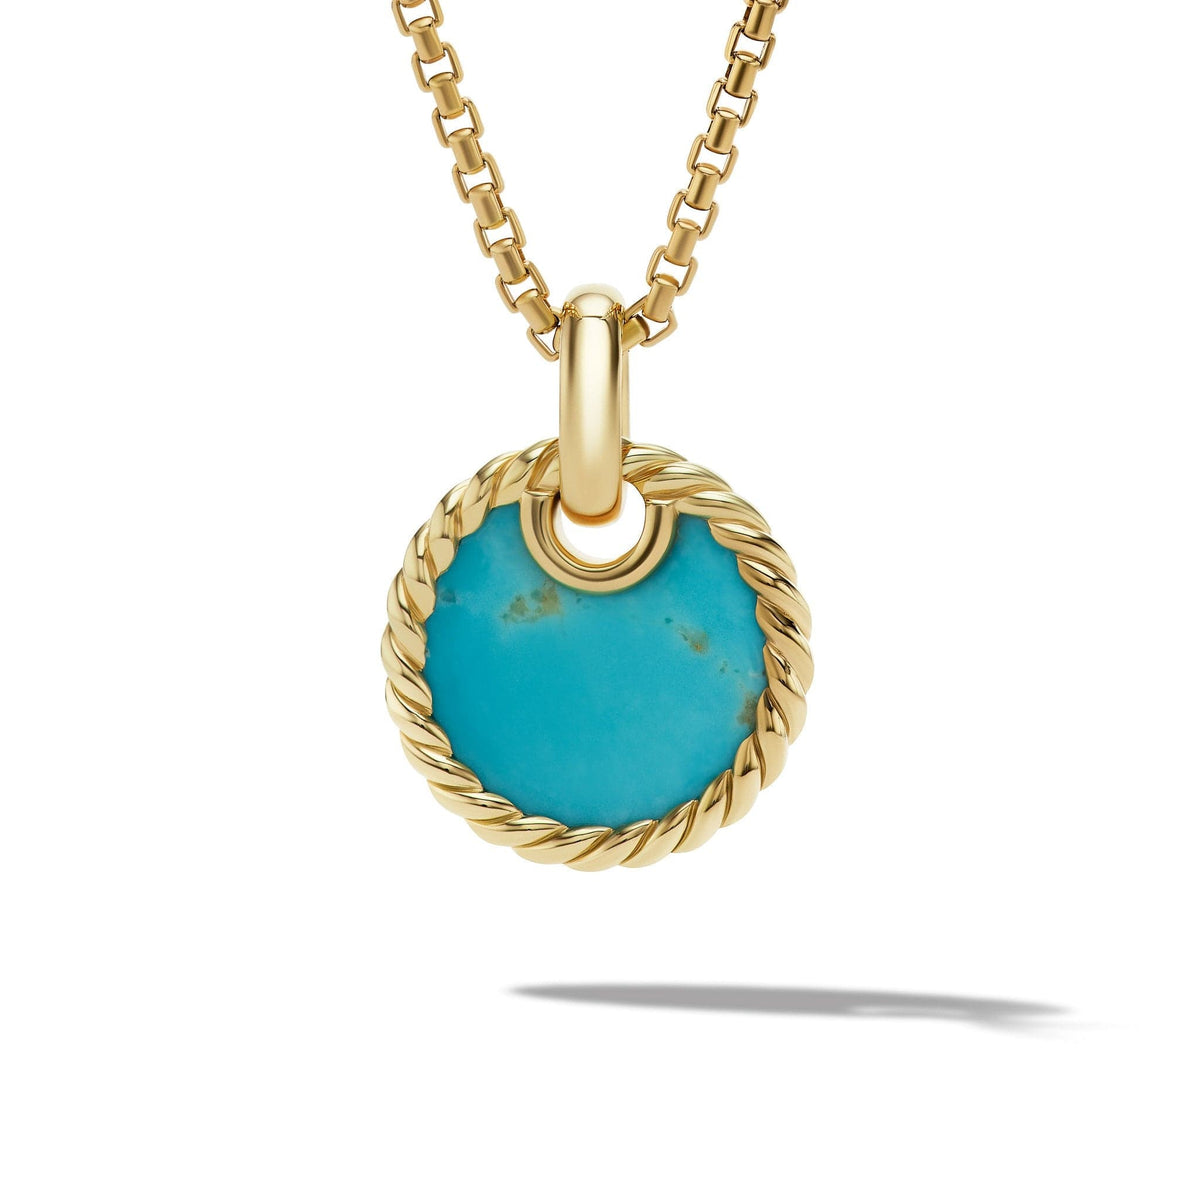 DY Elements® Disc Pendant in 18K Yellow Gold with Turquoise, Long's Jewelers